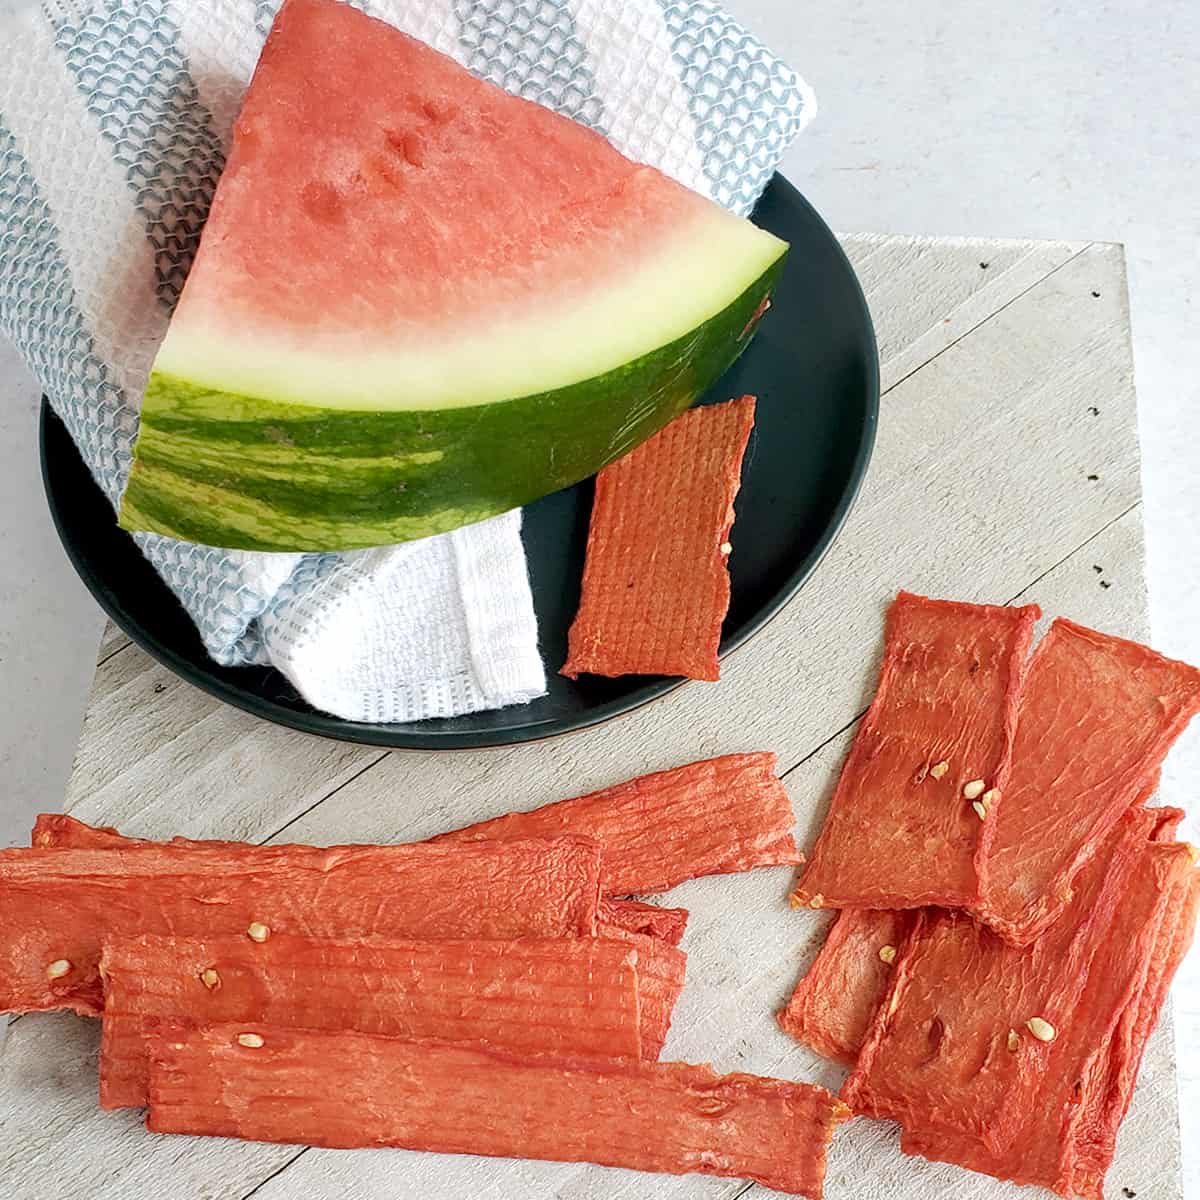 How to Dehydrate Watermelon